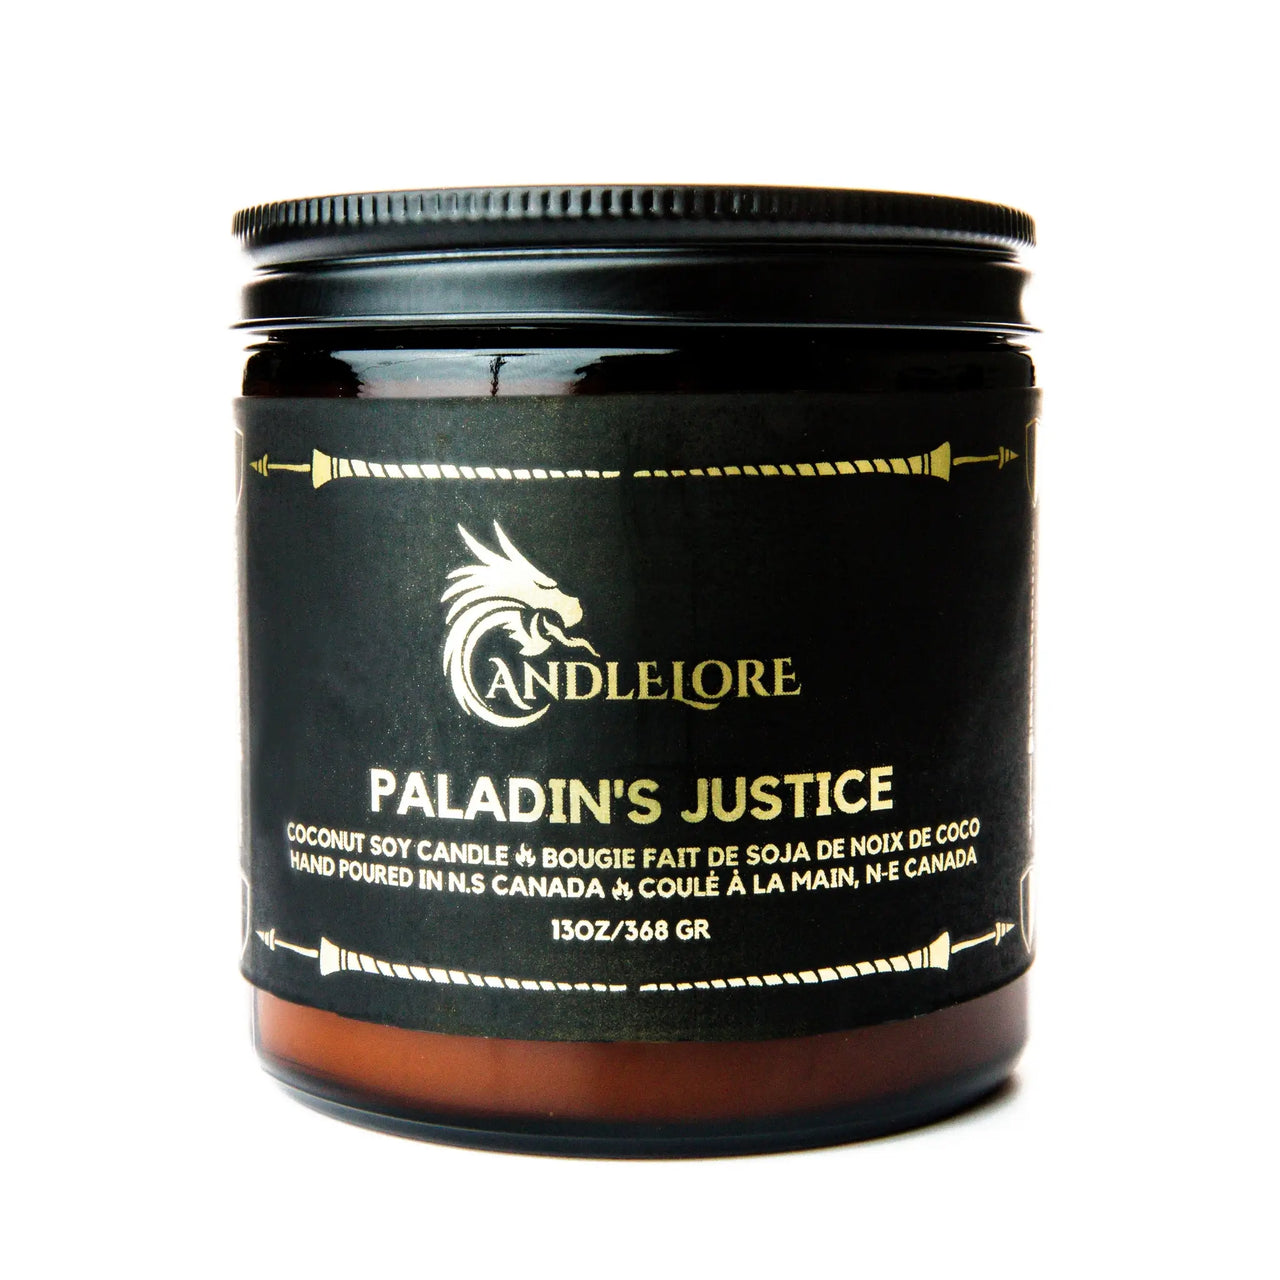 Large Paladin's Justice Candle